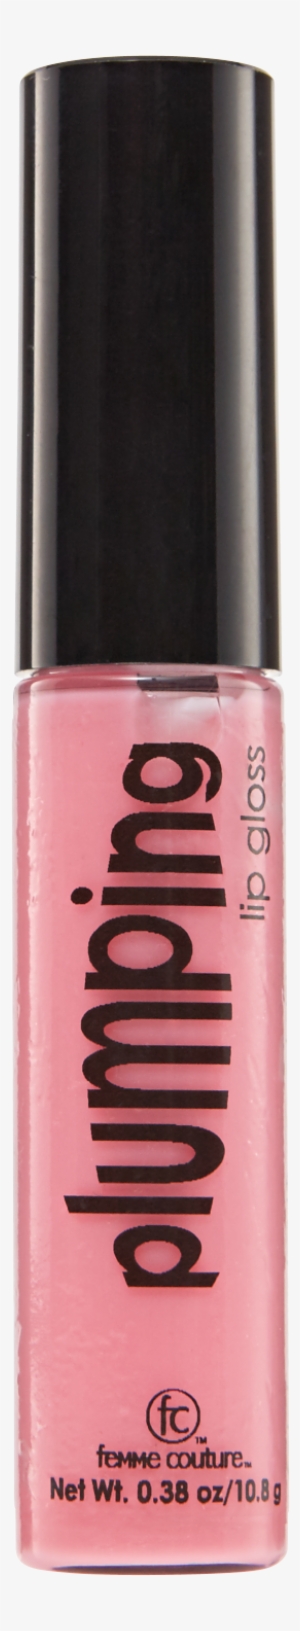 Loreal Infallible Pro Gloss Suede